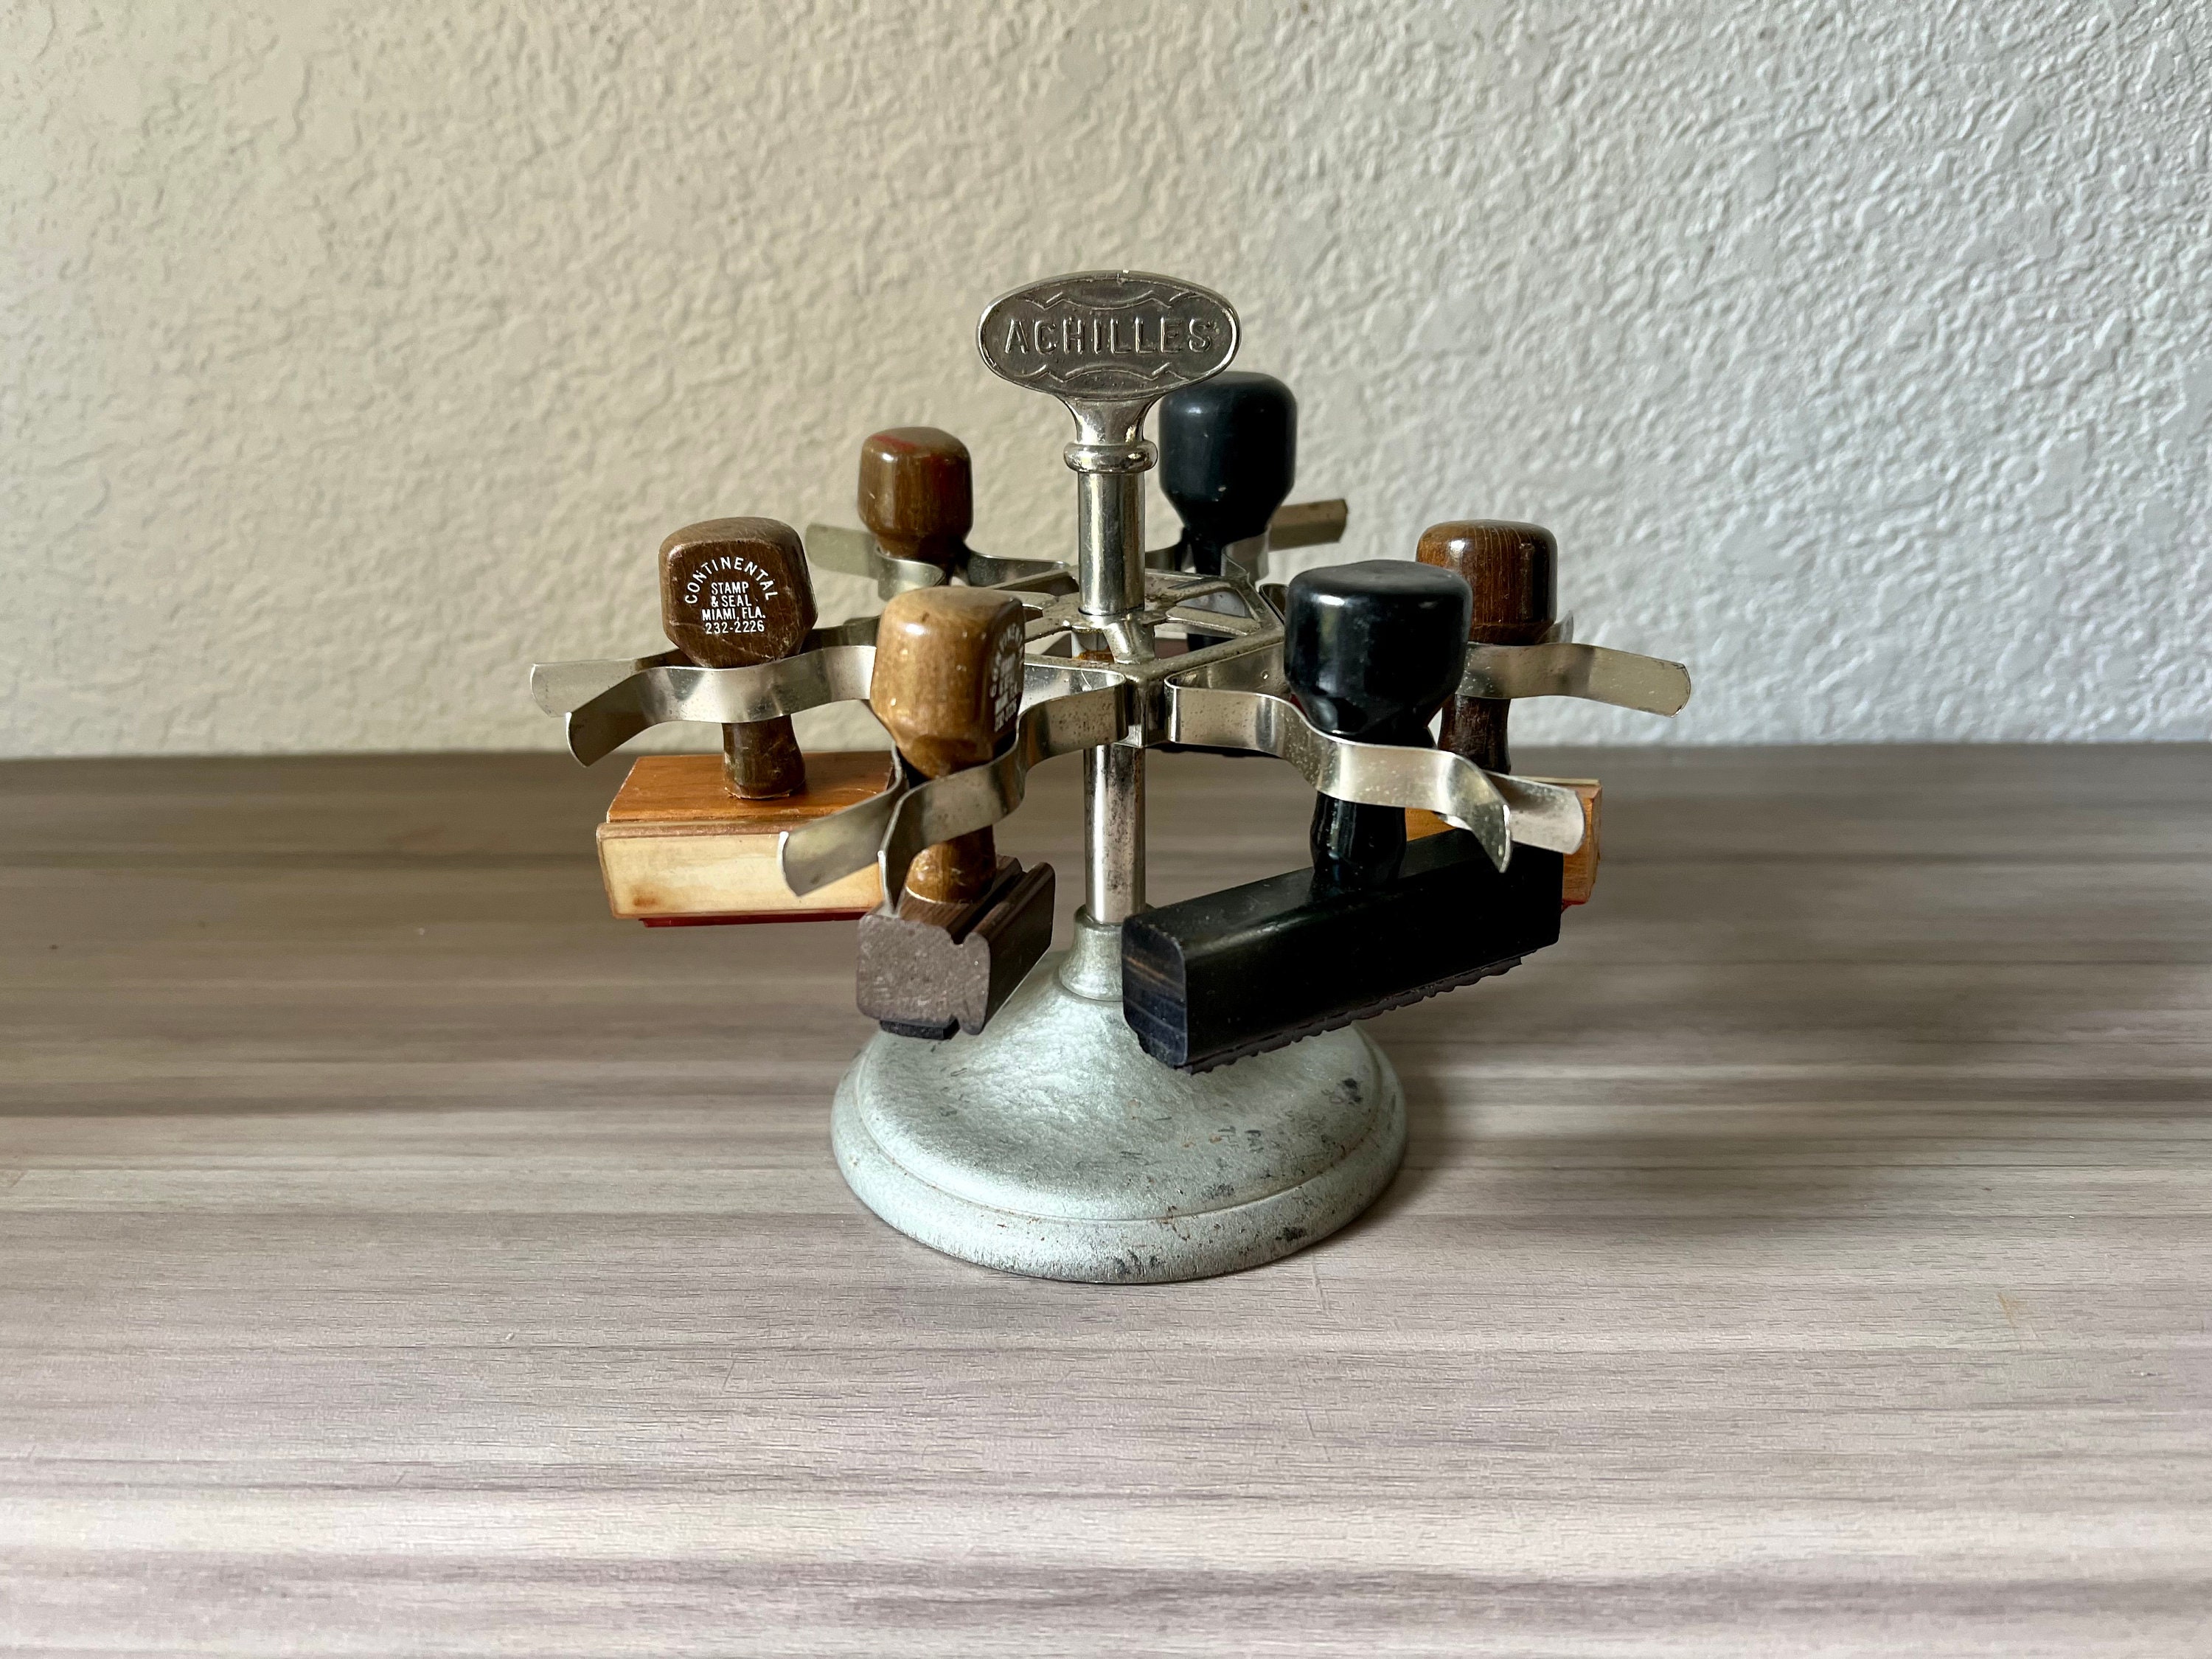 Vintage Metal Rubber Stamp Holder Carousel by Achilles With Rubber Stamps,  Unique Vase, Tool Holder, Industrial Decor, Mother's Day 